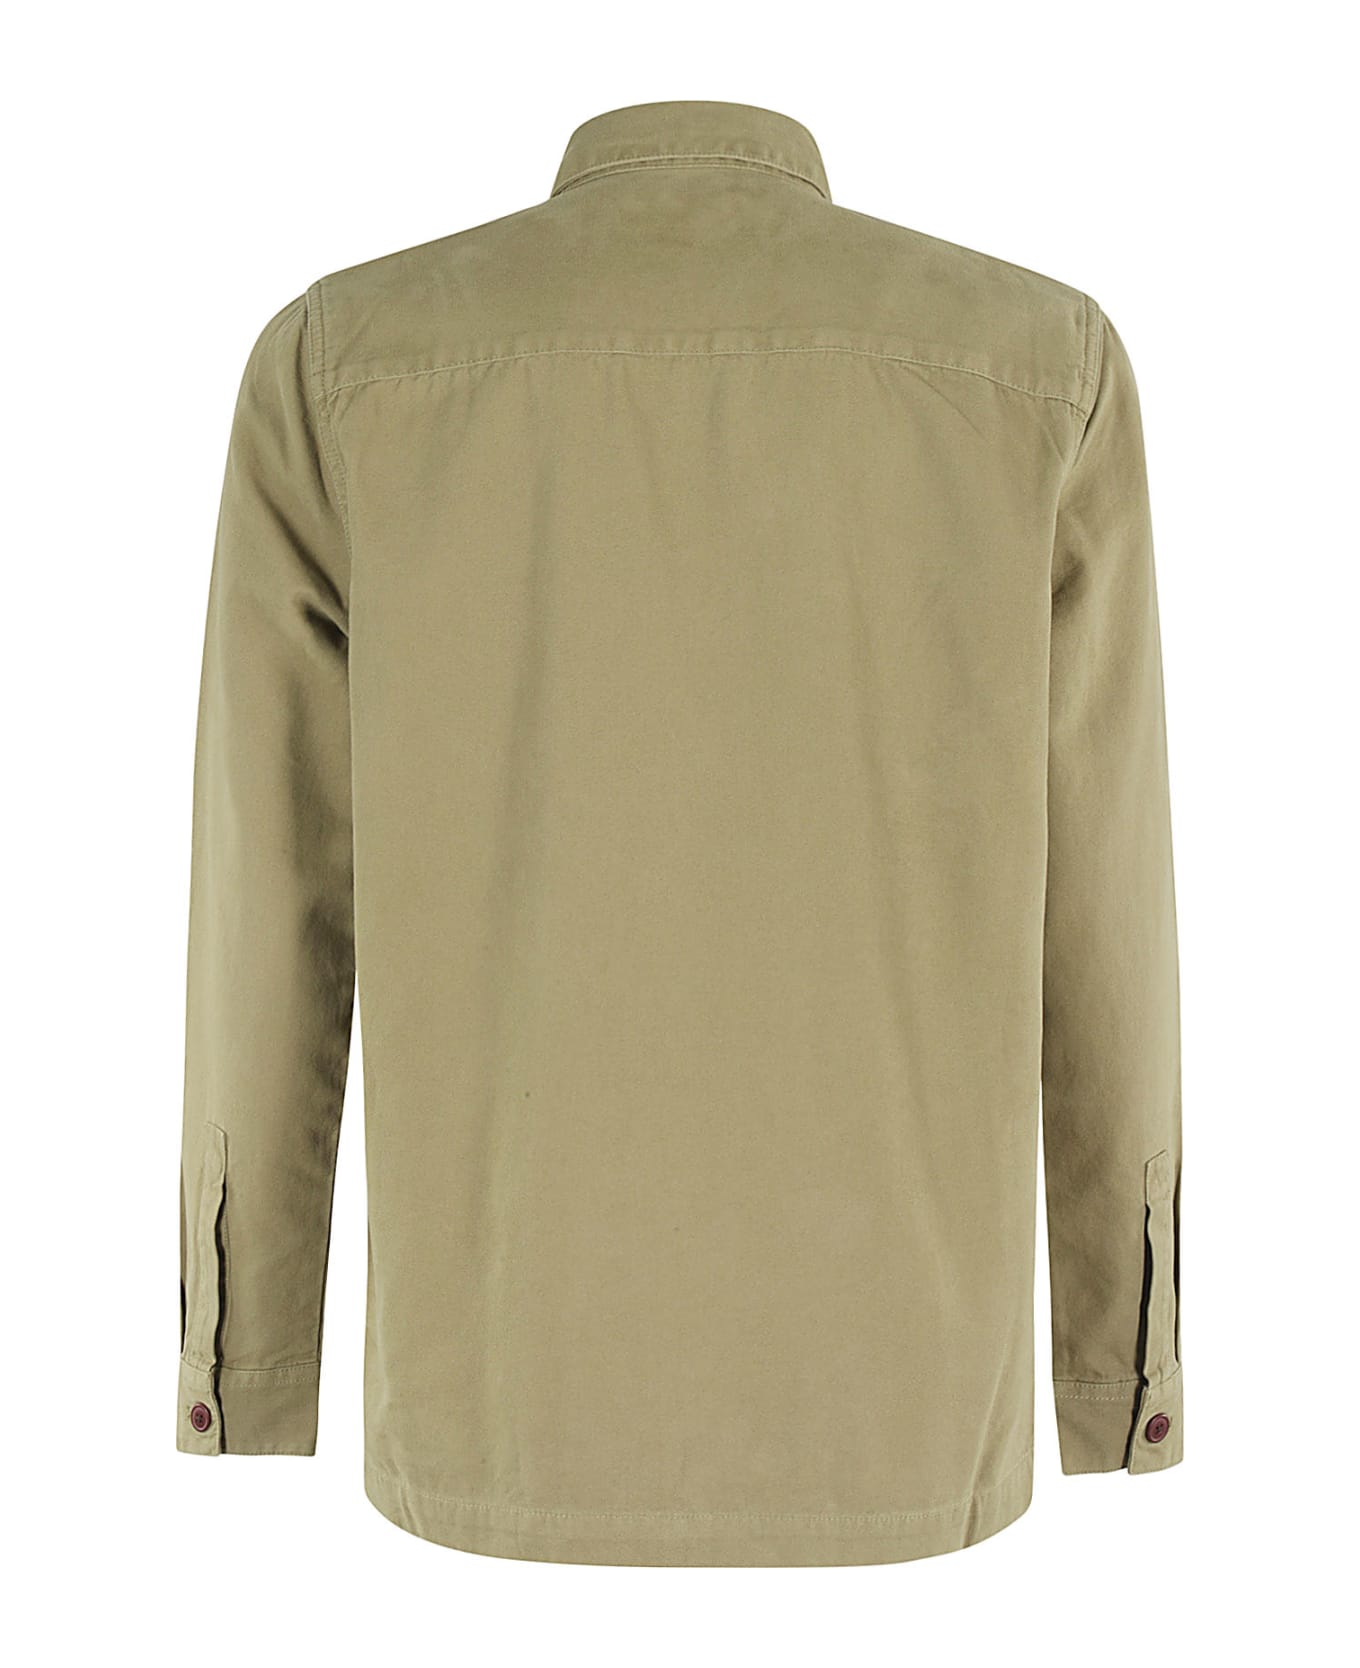 Barbour Washed Overshirt - Bleached Olive シャツ